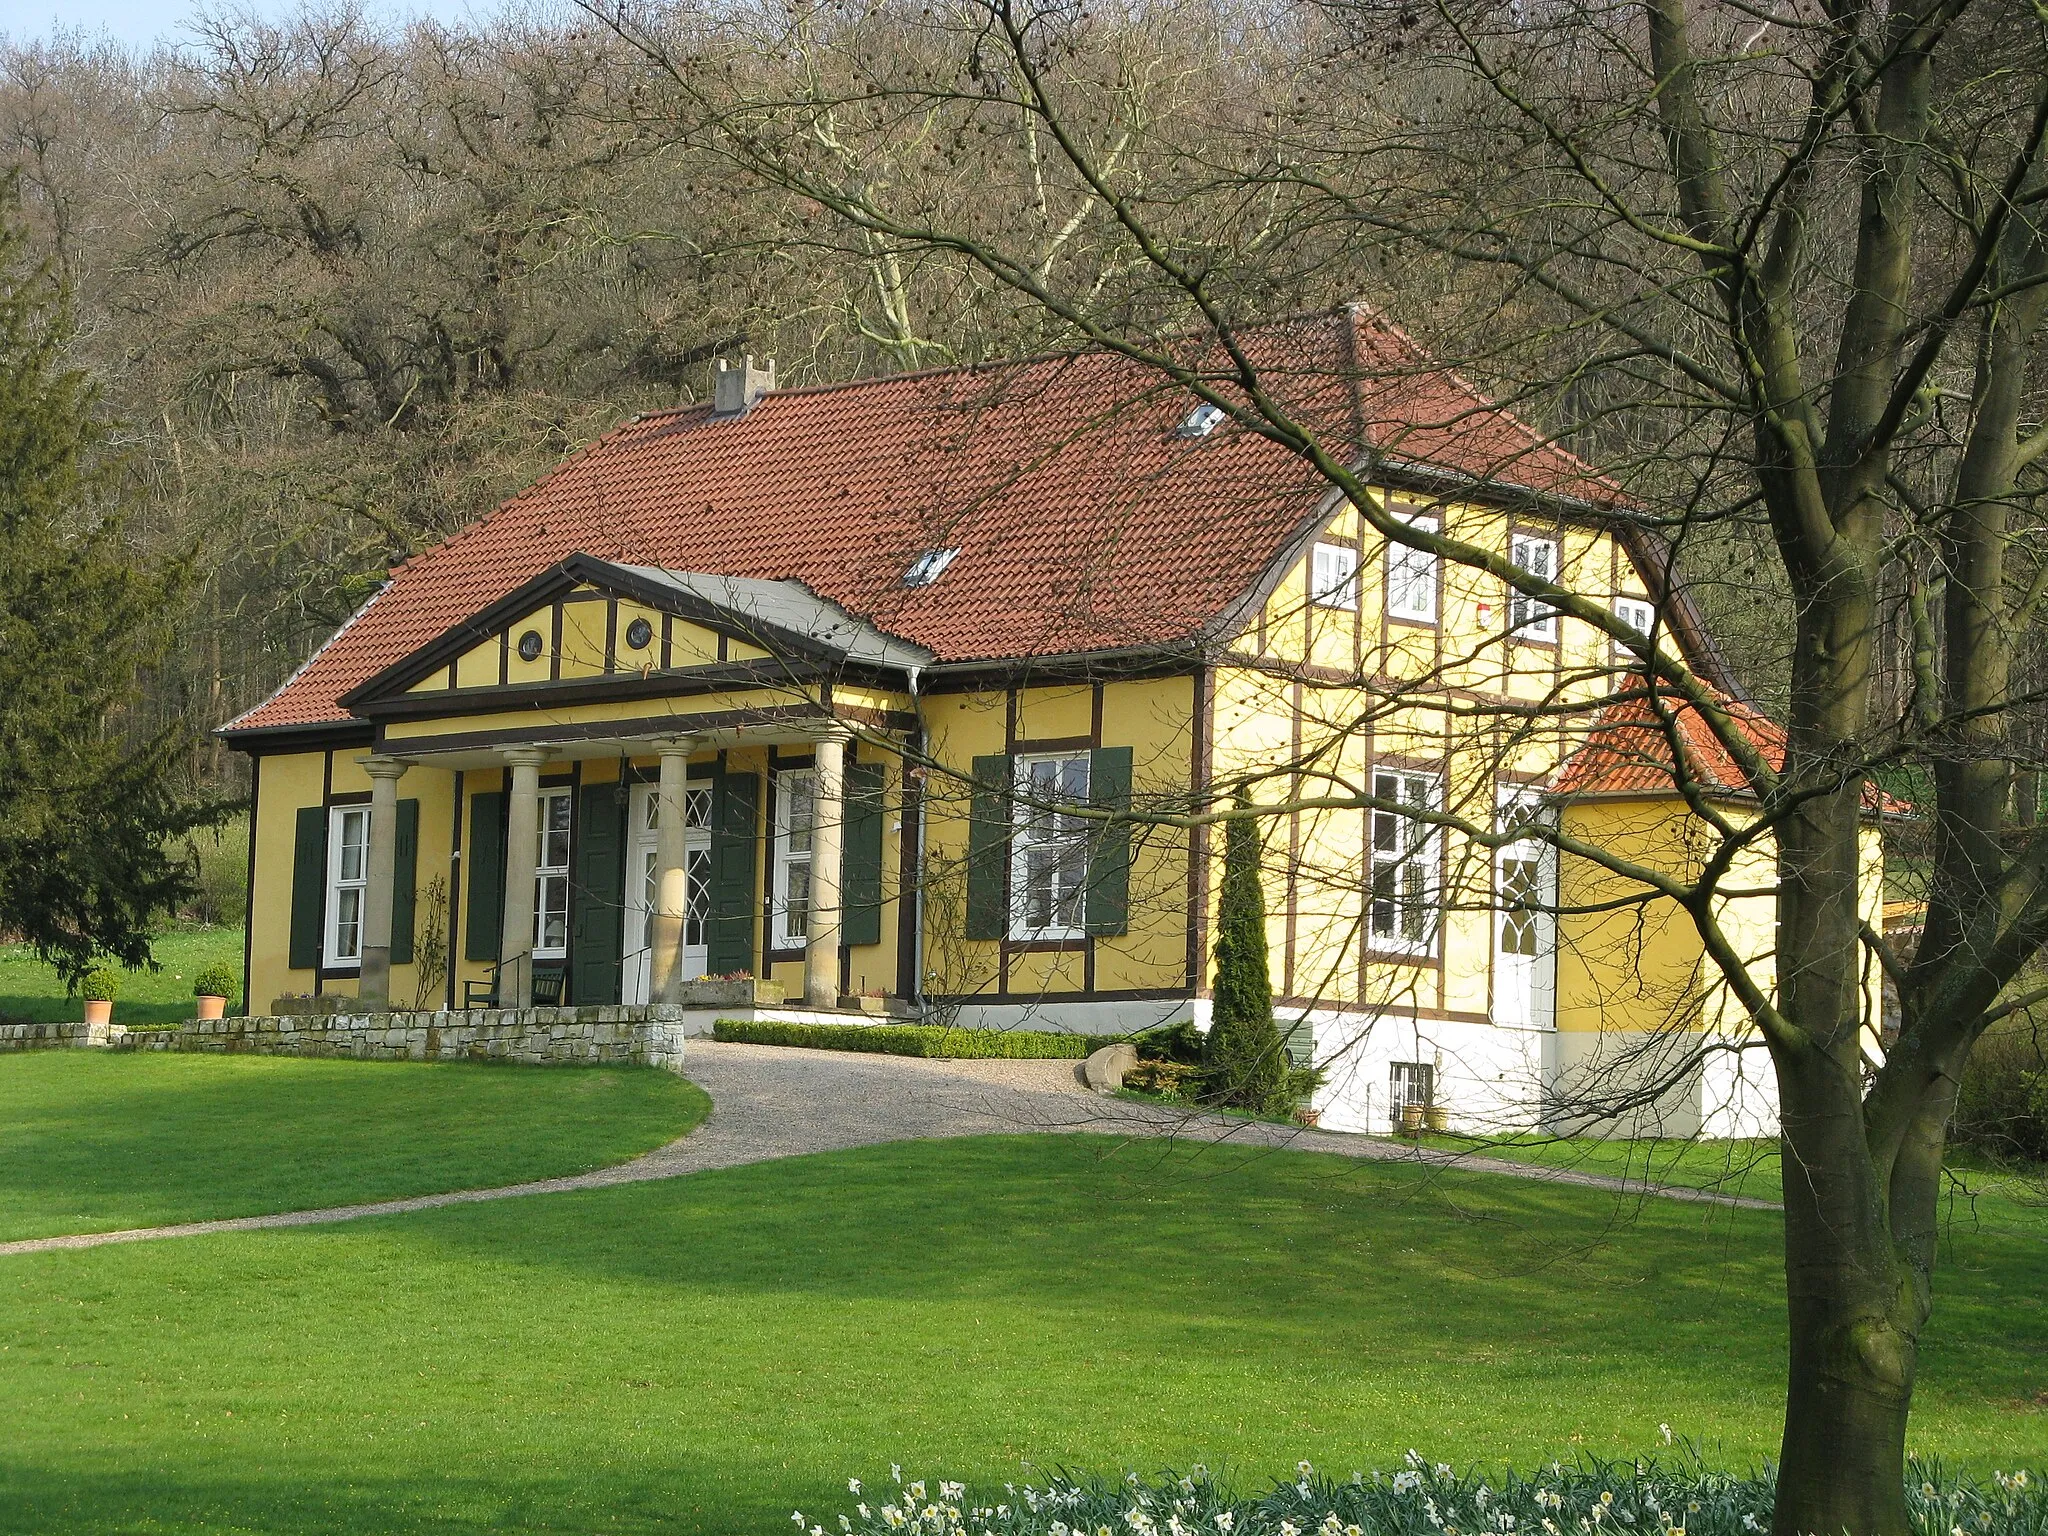 Photo showing: House at park of Obernfelde Manor in Lübbecke, District of Minden-Lübbecke, North Rhine-Westphalia, Germany.